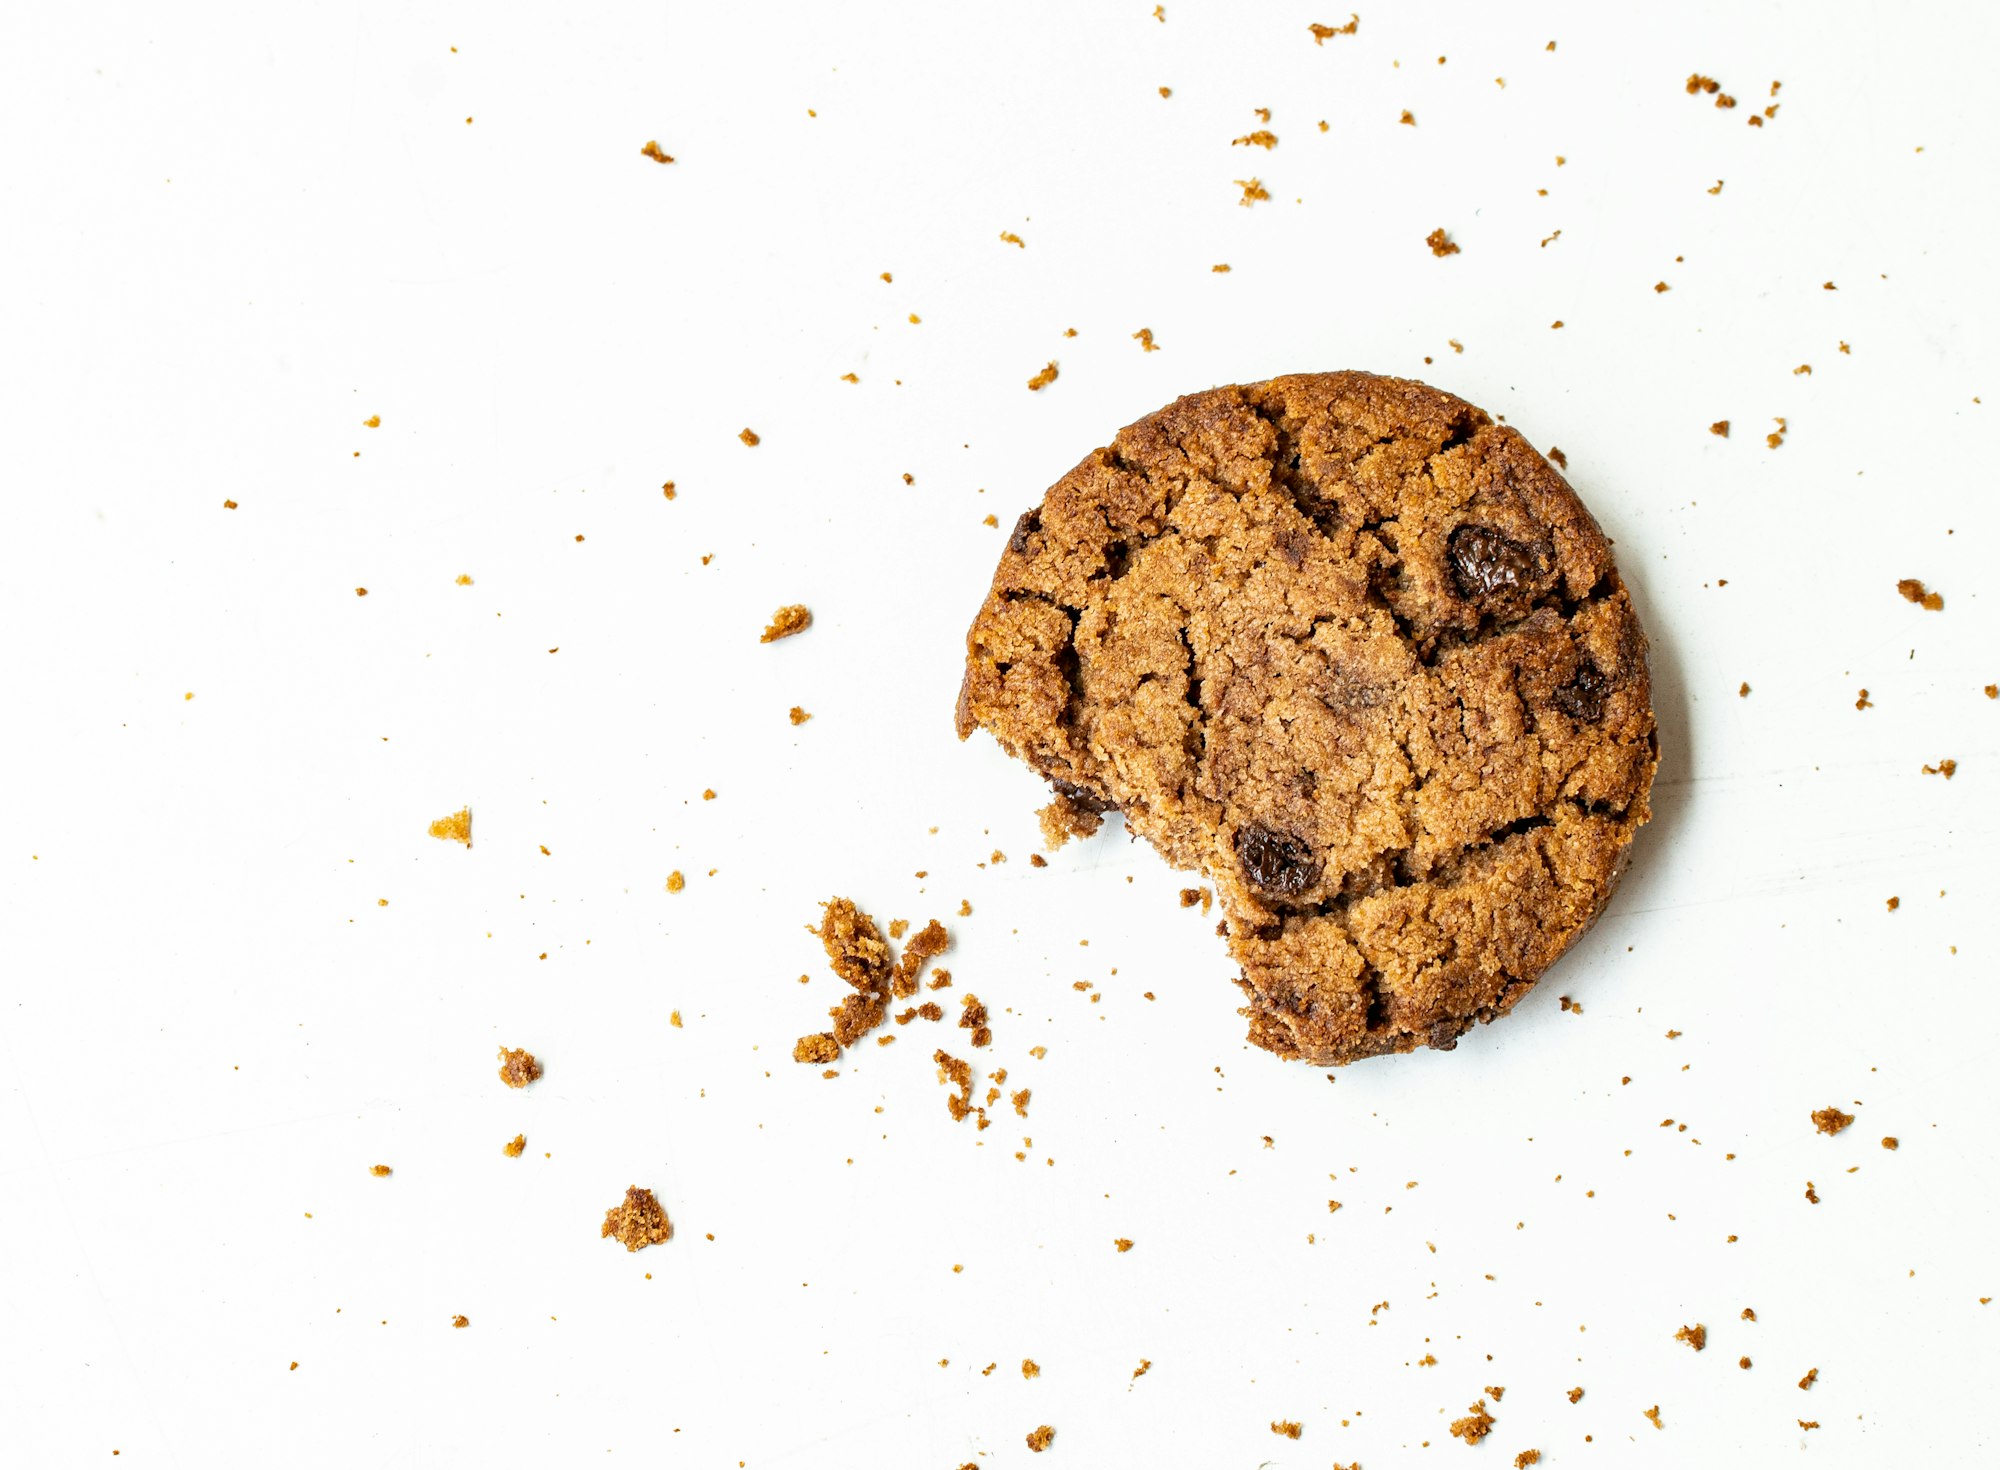 What Is The #1 Cookie In The U.S.?